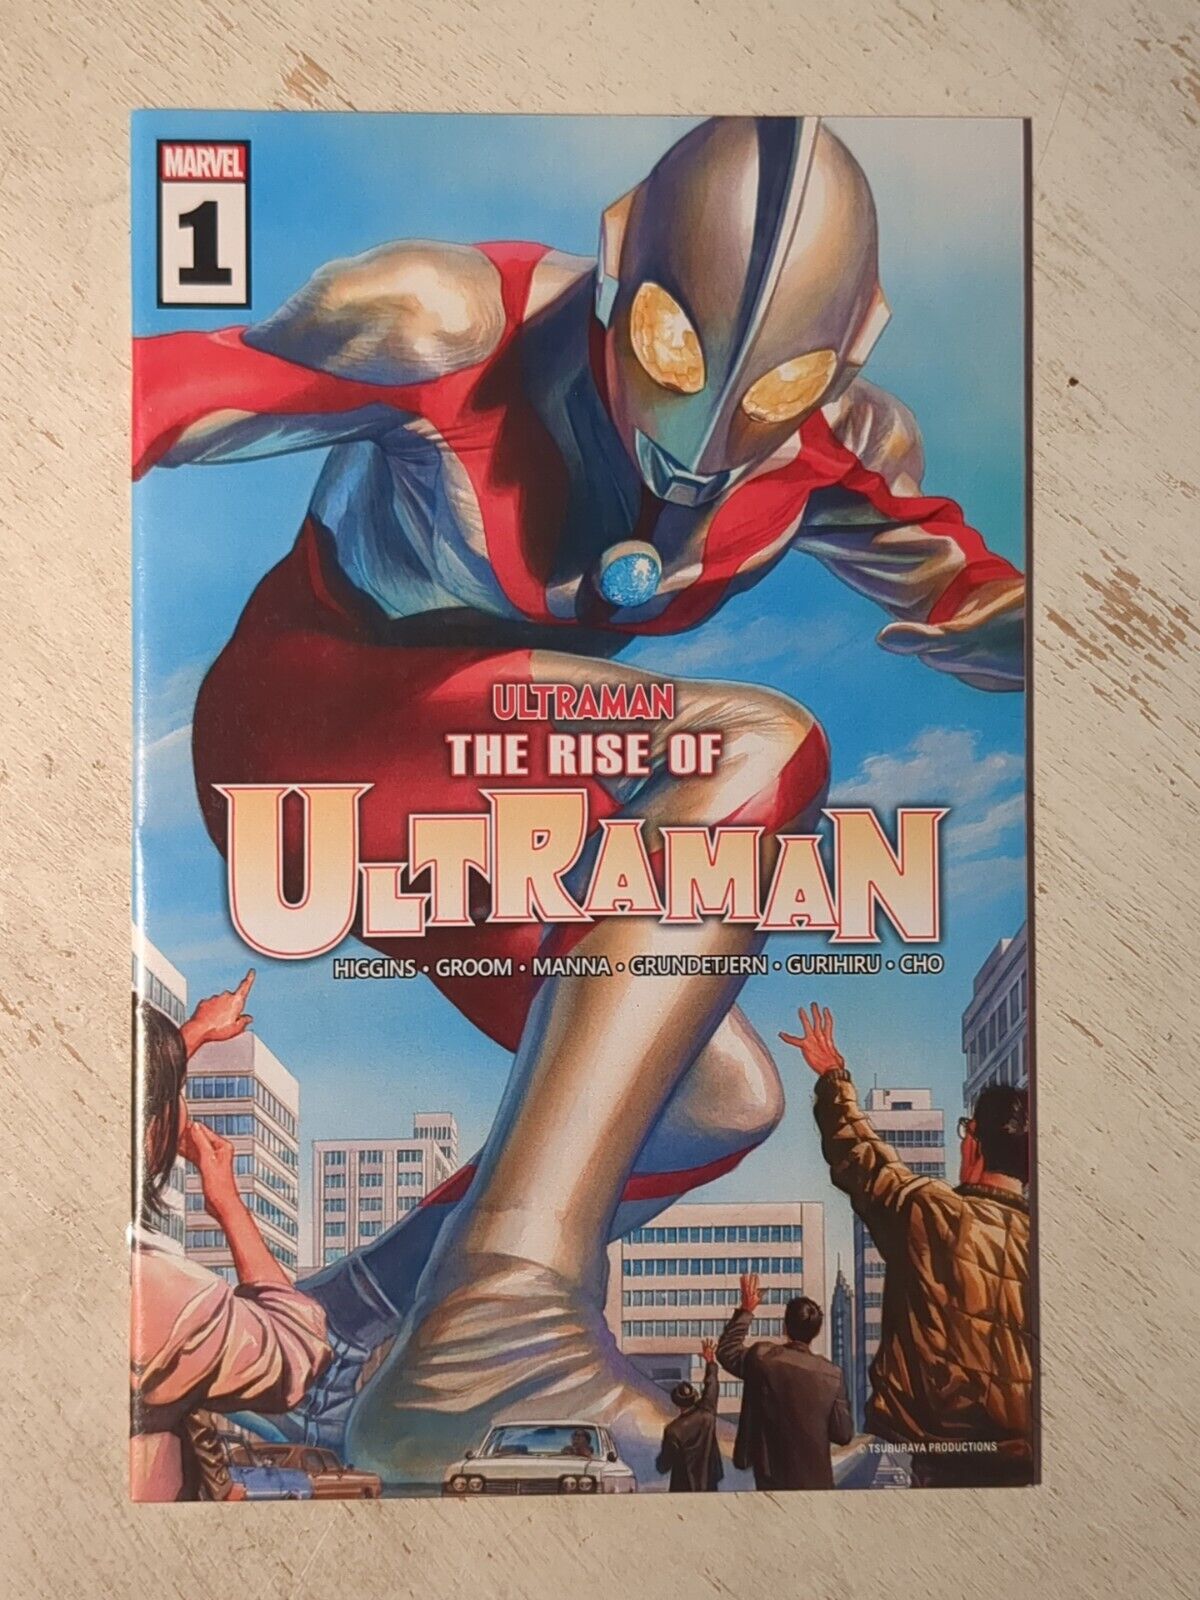 The Rise of Ultraman #1 RAW Alex Ross Cover Marvel 2020 SHIPS FREE